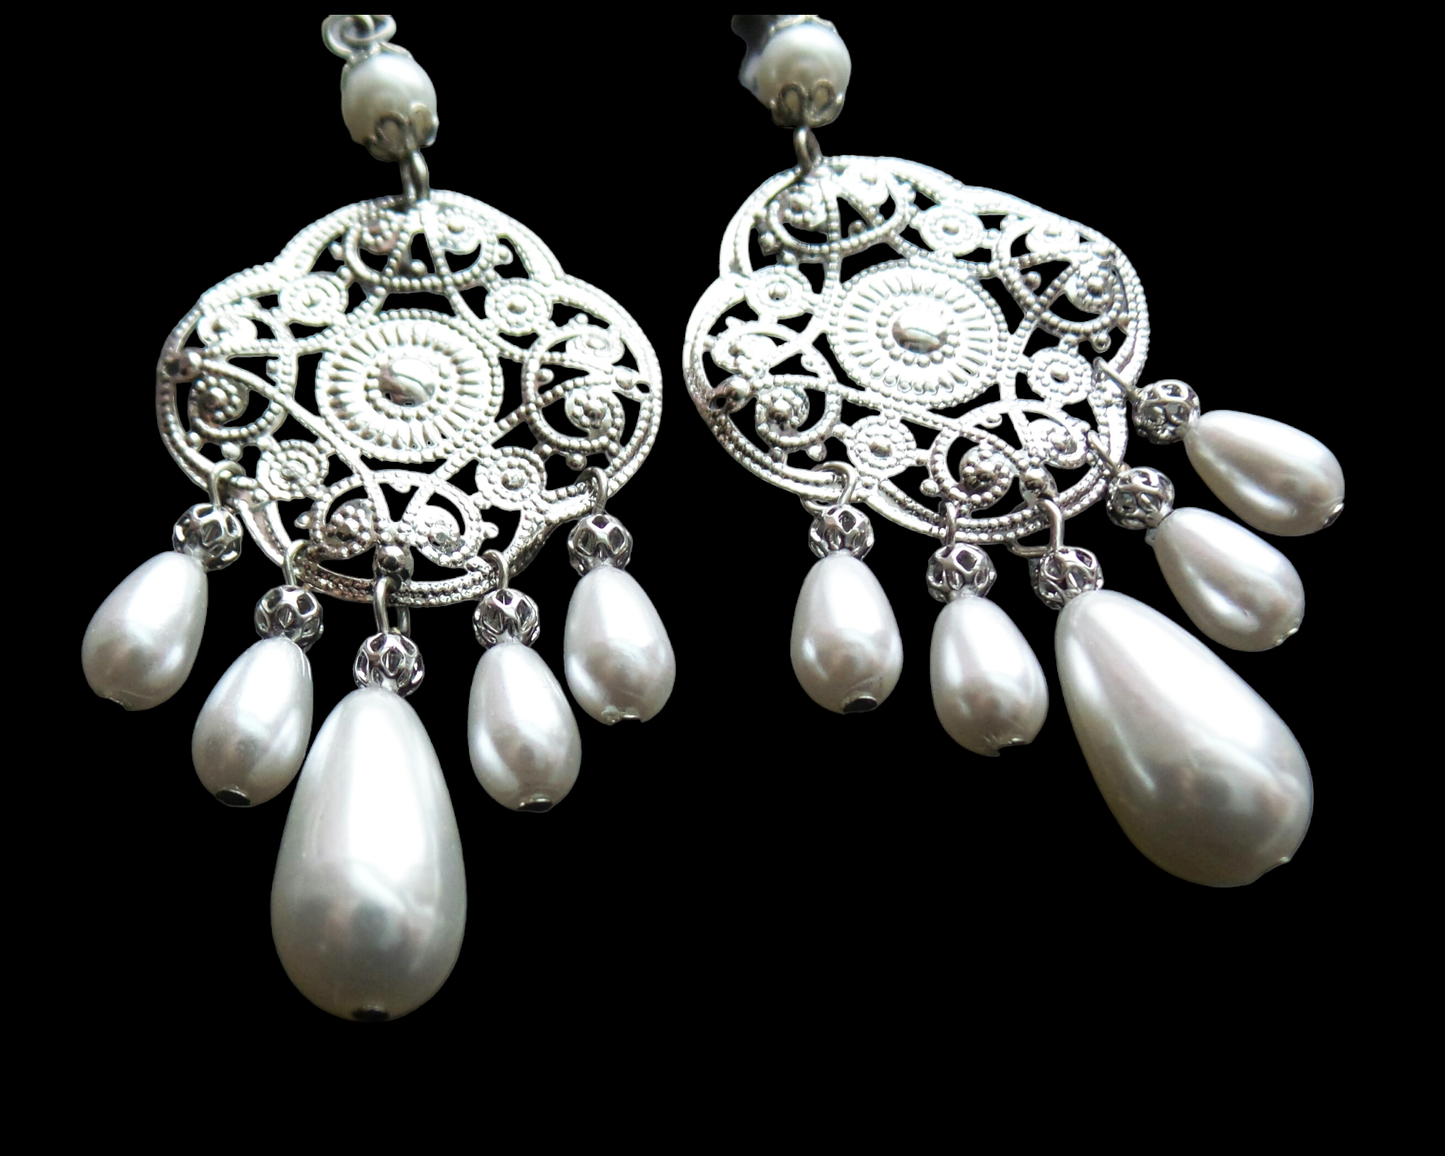 Extra Long Art Deco Style Pearl Chandelier Earrings with silver tone, white gold color metal and white drop shaped pearls, displayed on black background